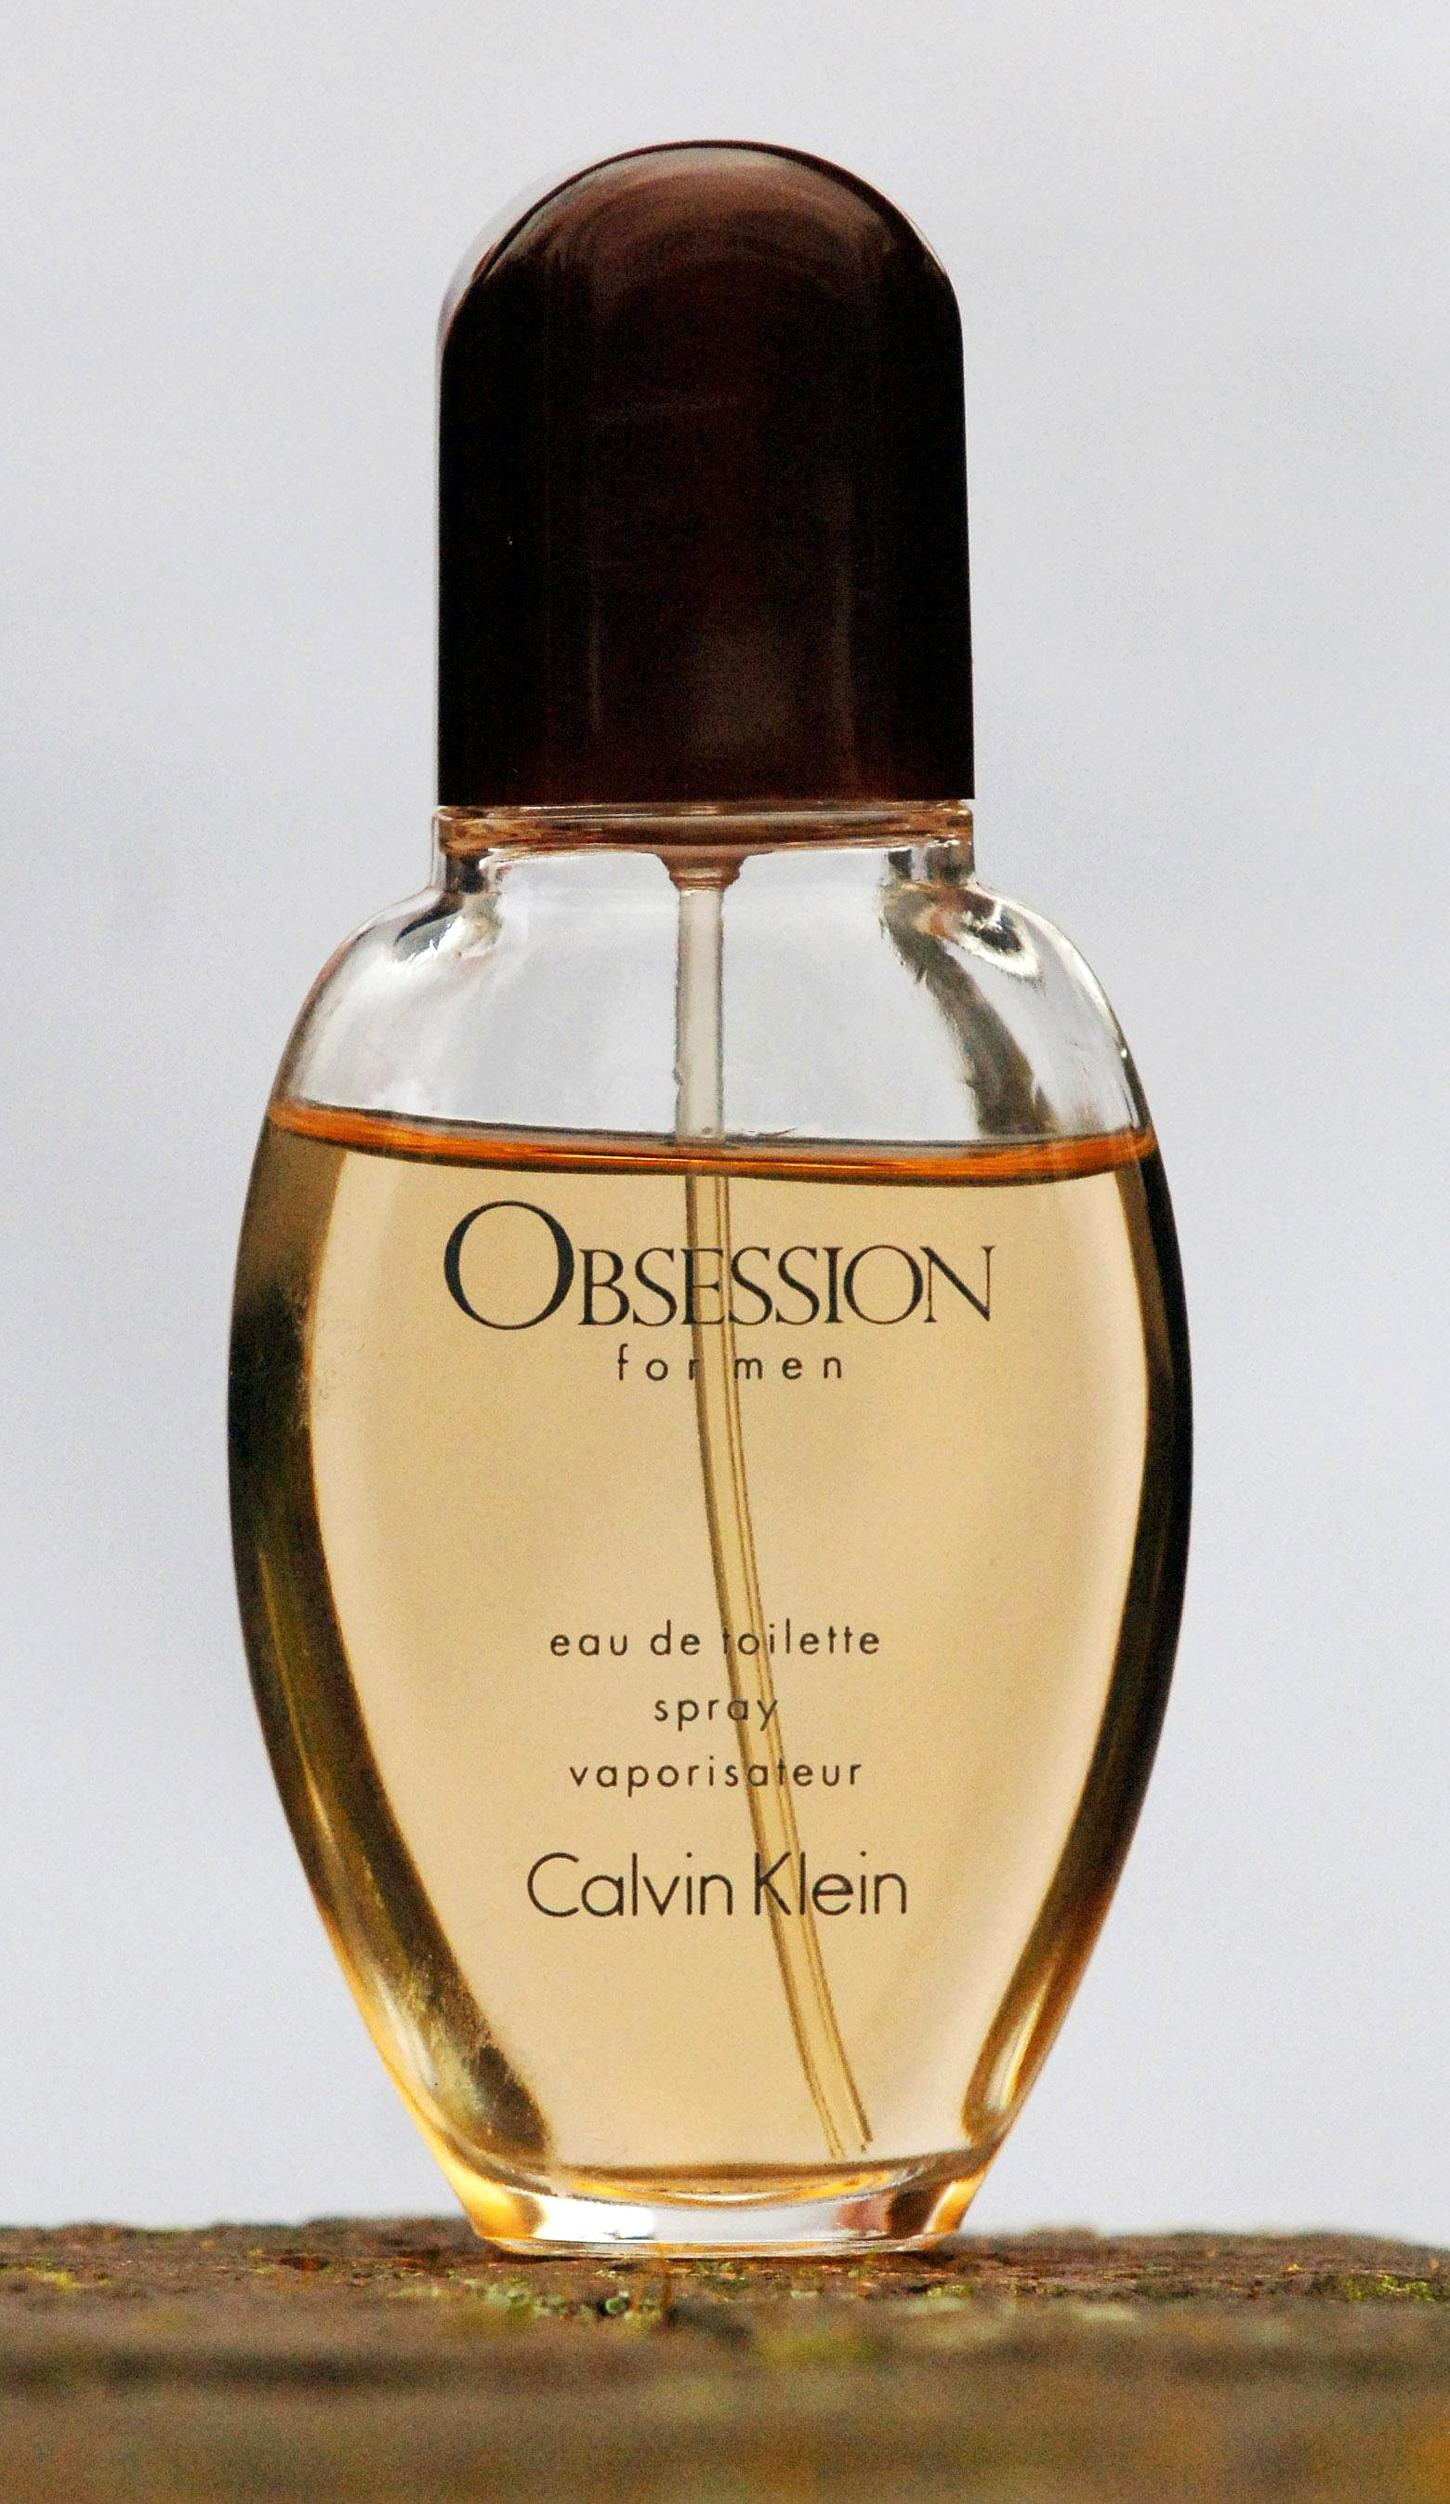 A bottle of Calvin Klein's Obsession